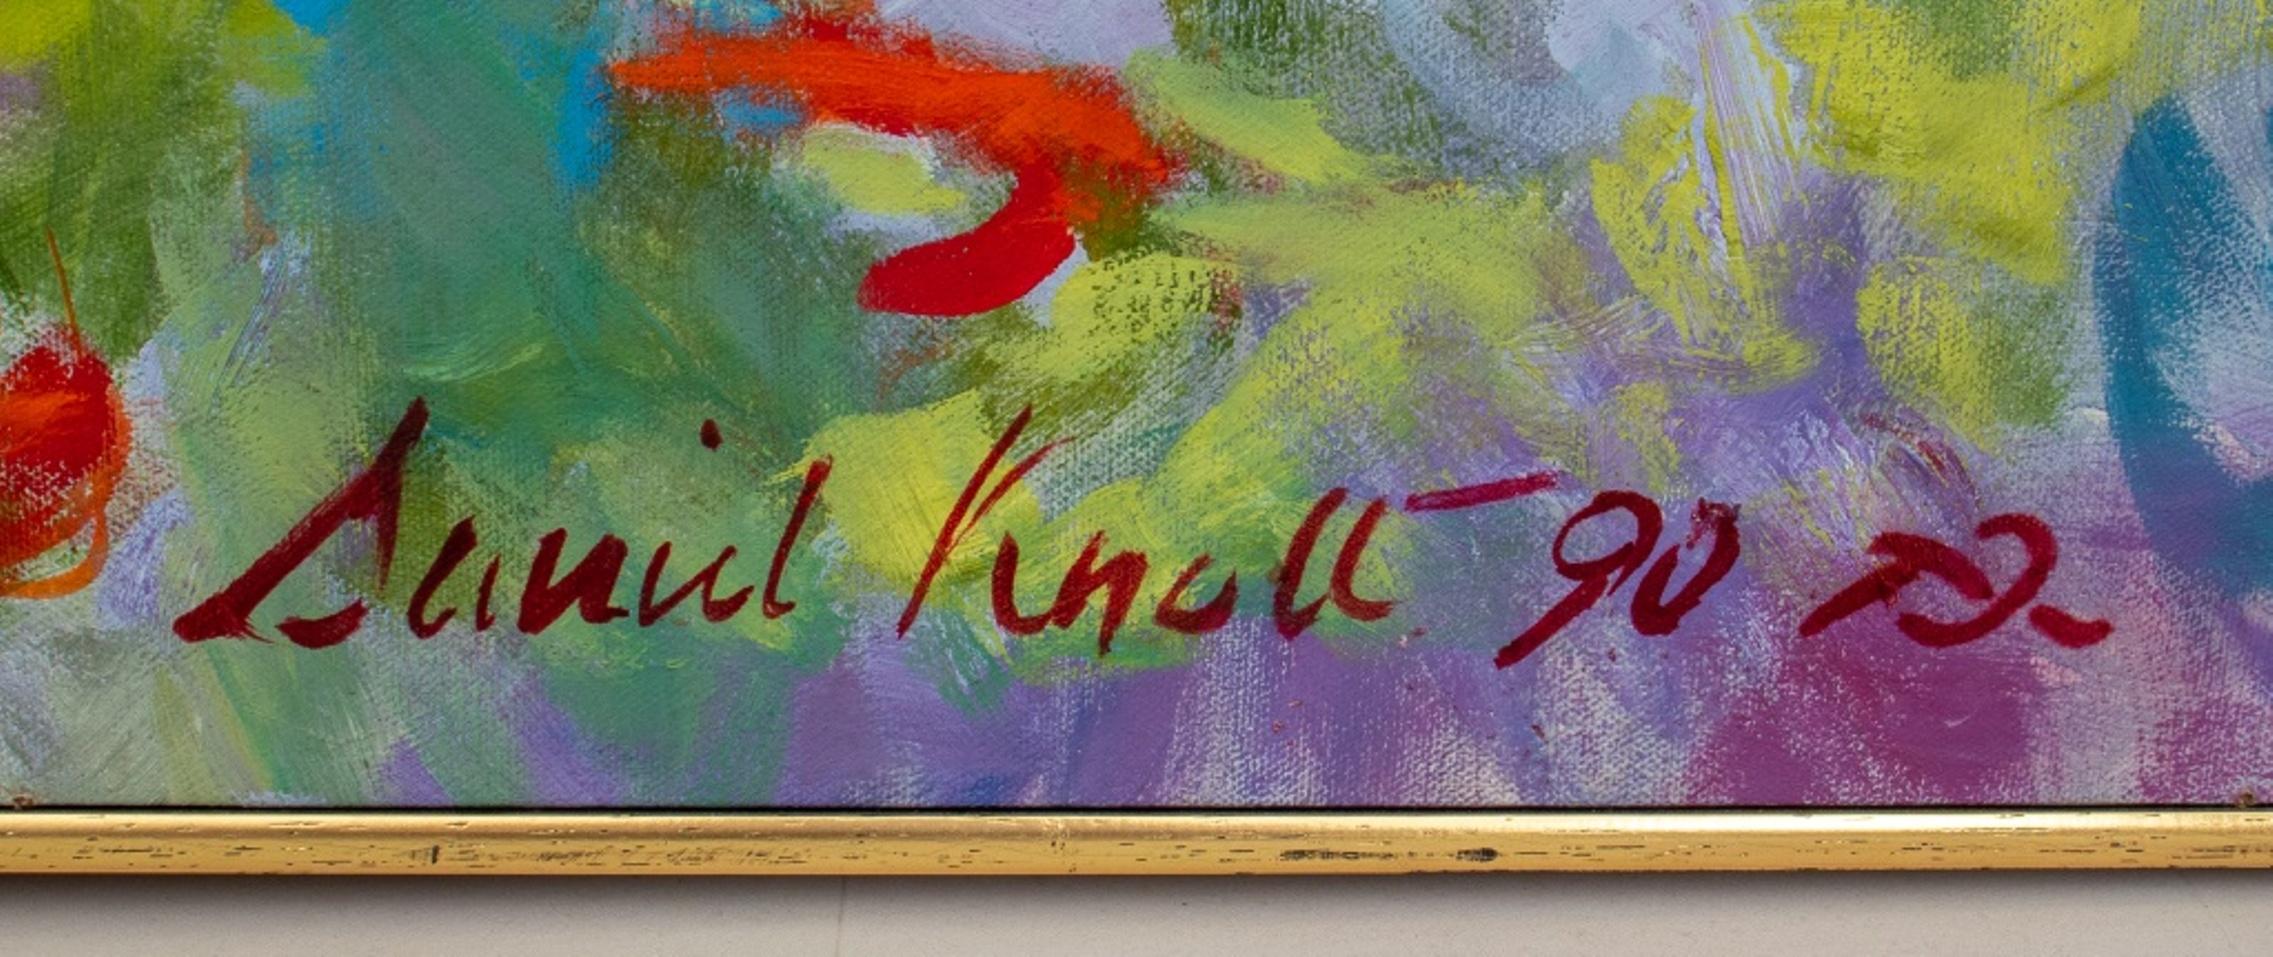 Daniel Knoll (American, XX-XXI) Impressionistic oil painting on canvas, 1990, depicting vining red flowers, signed and dated lower right, housed in a gilt wood frame.

Dimensions: Image: 47